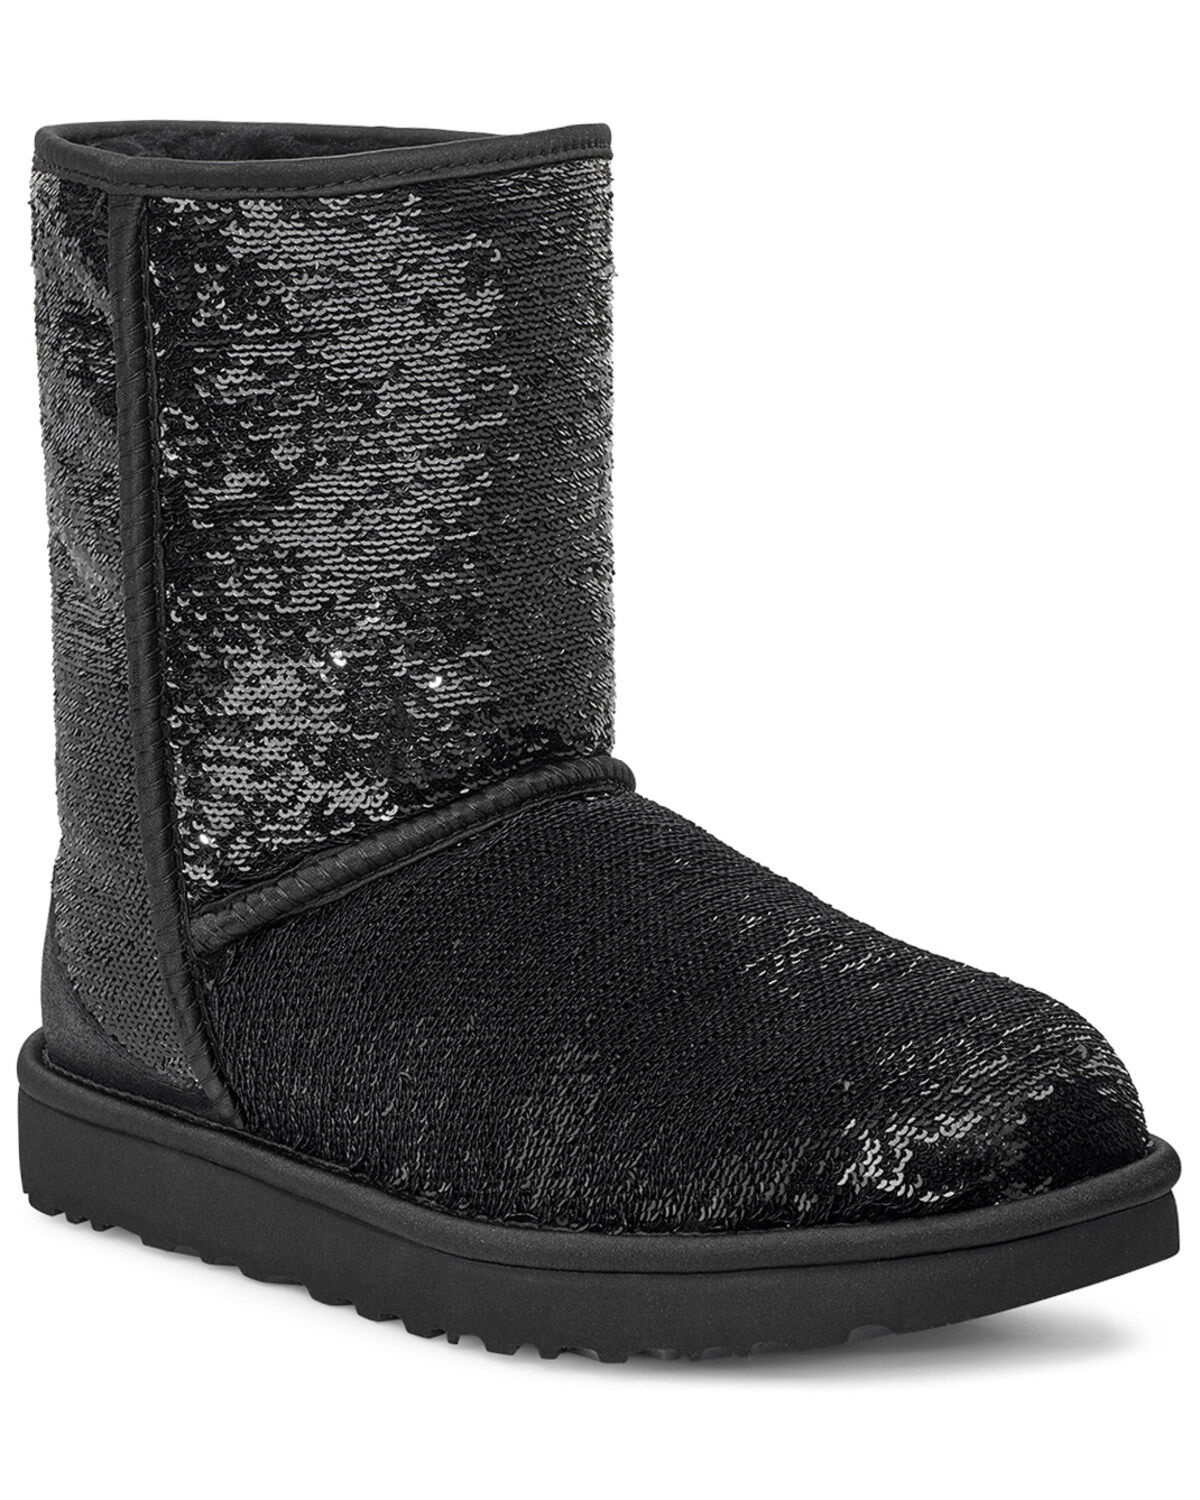 champagne sequin uggs